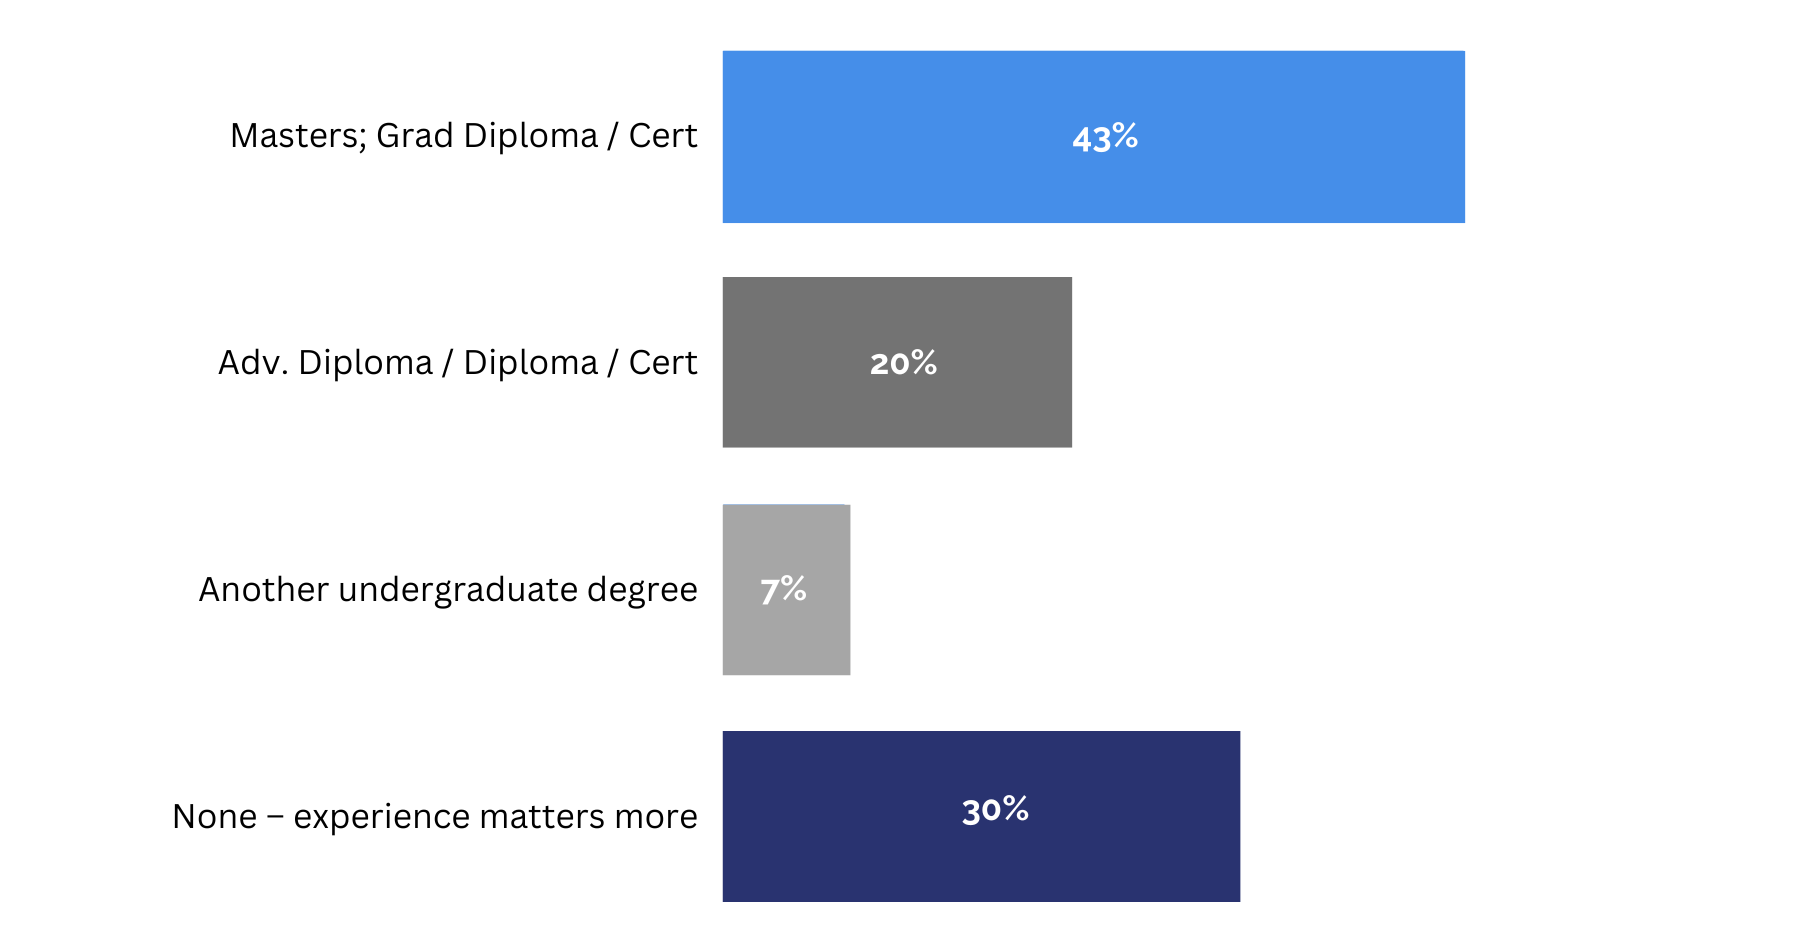 education vs experience poll results